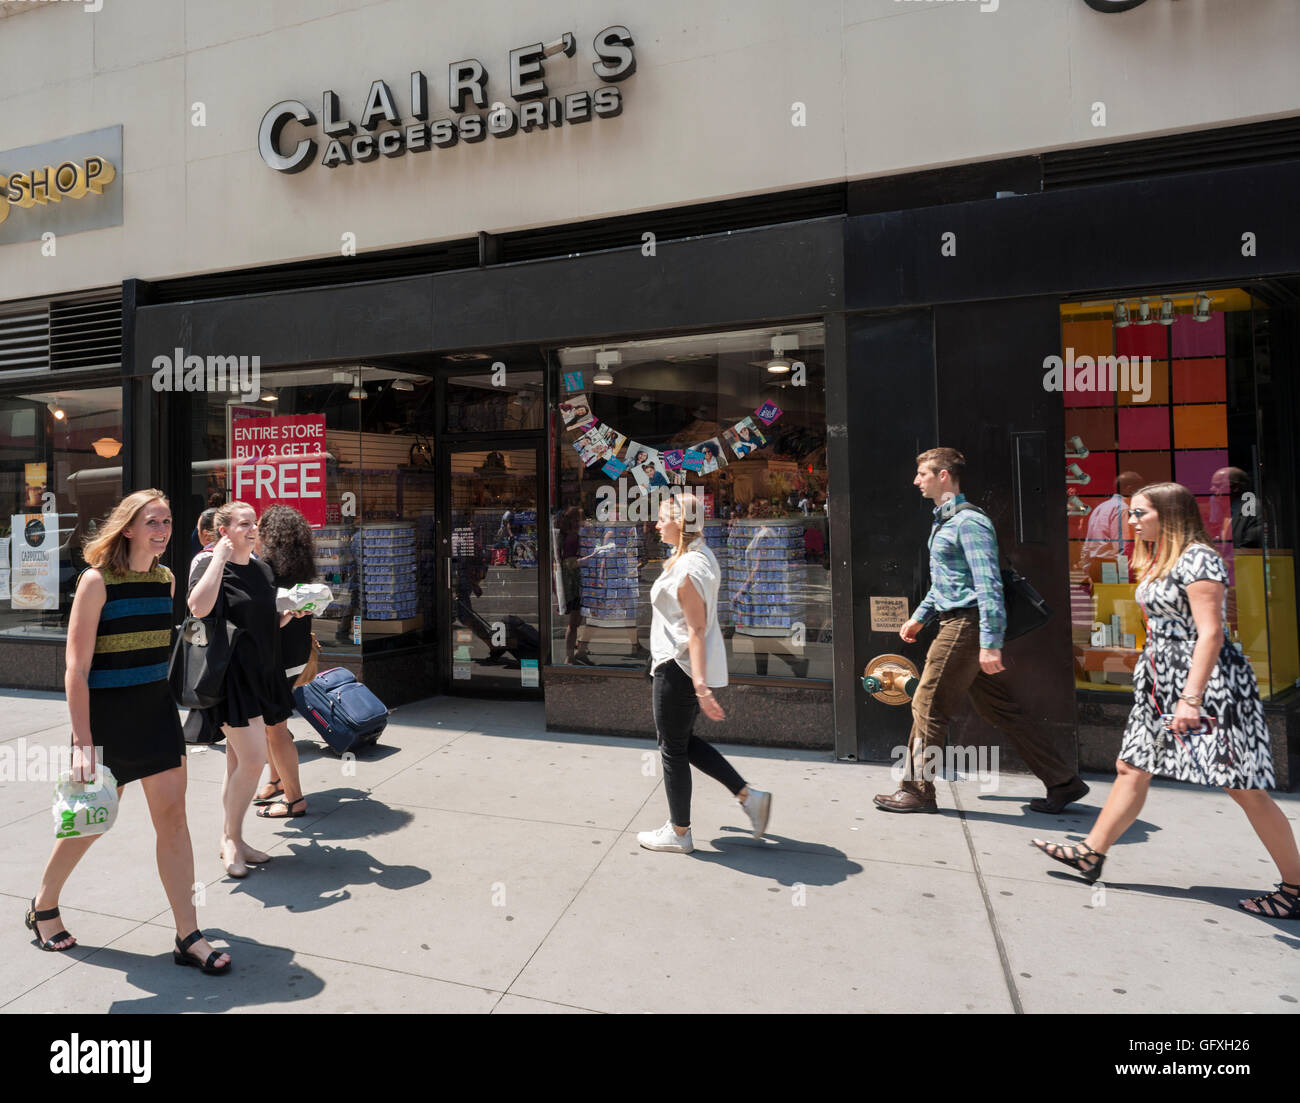 A Claire's Store in Midtown Manhattan in New York on Thursday, July 28, 2016. The retailer, owned by Apollo Global Management, is saddled with debt and is reported to need an increased cash flow during the next few months. Luckily, the back-to-school season is the chains second busiest but it will have to sell a lot of accessories to teens. The retailers owes $2.4 billion and faces bankruptcy. (© Richard B. Levine) Stock Photo